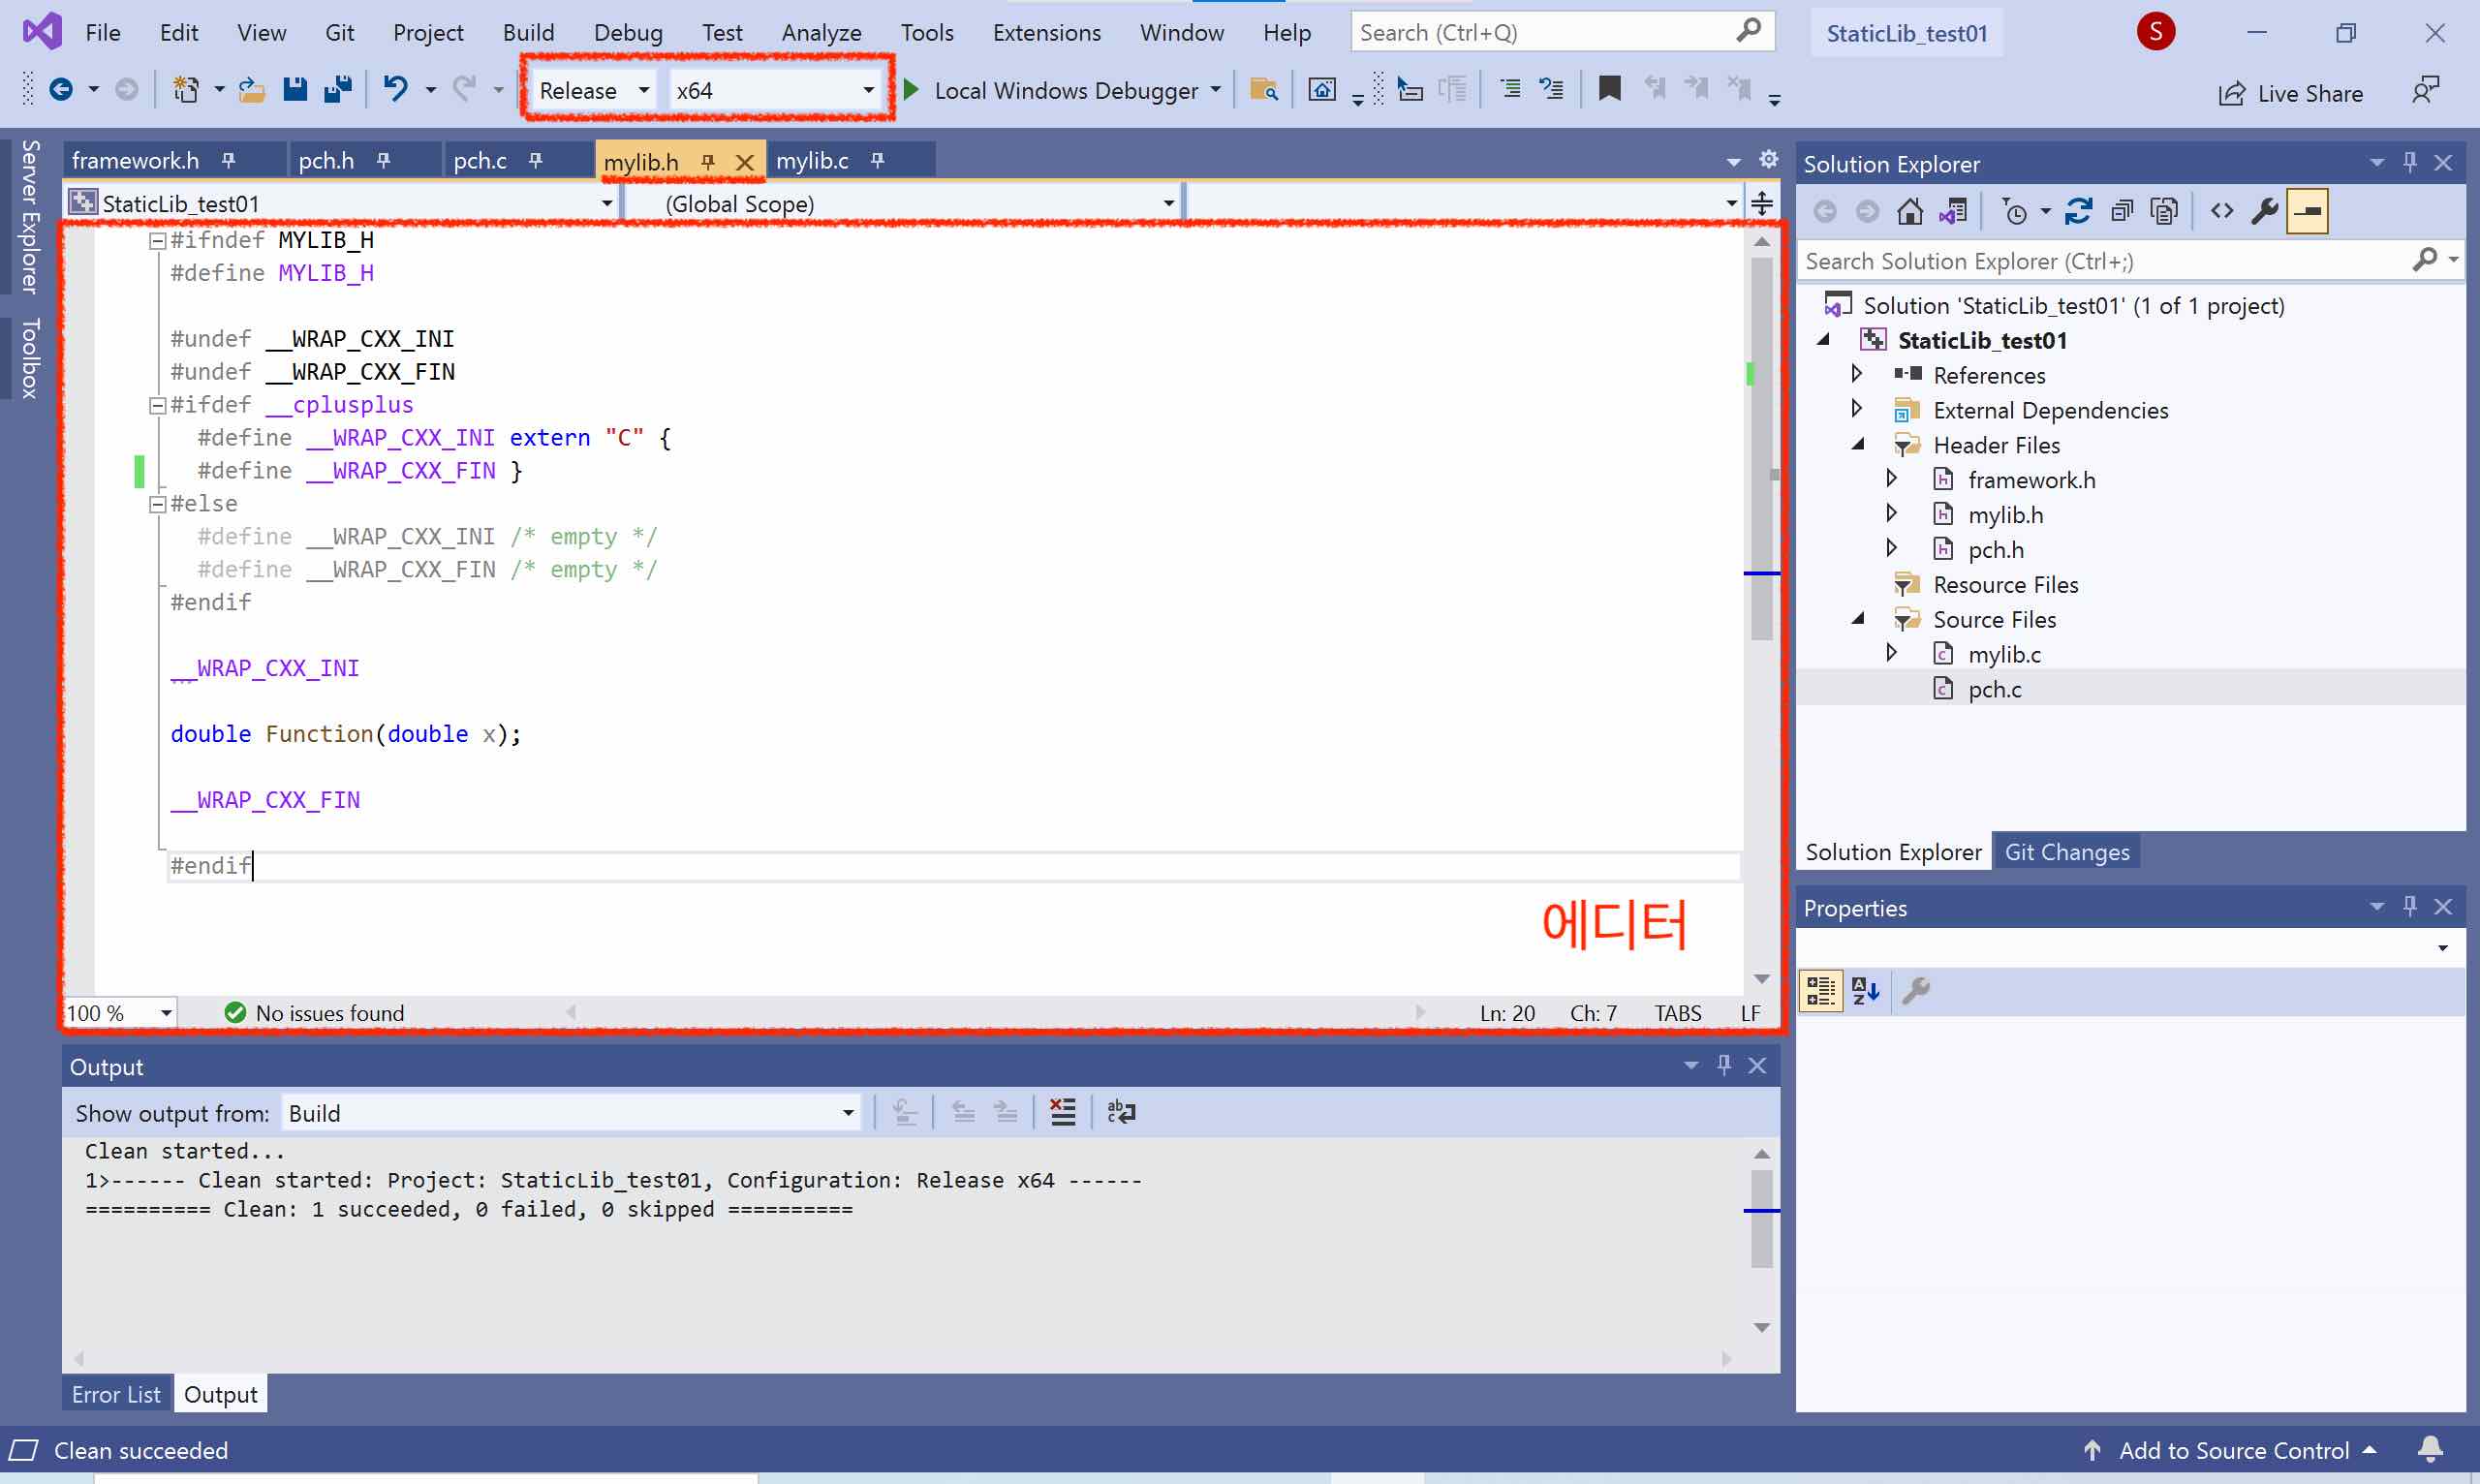 screenshot of Visual Studio Community 2019, showing editor for source and header files